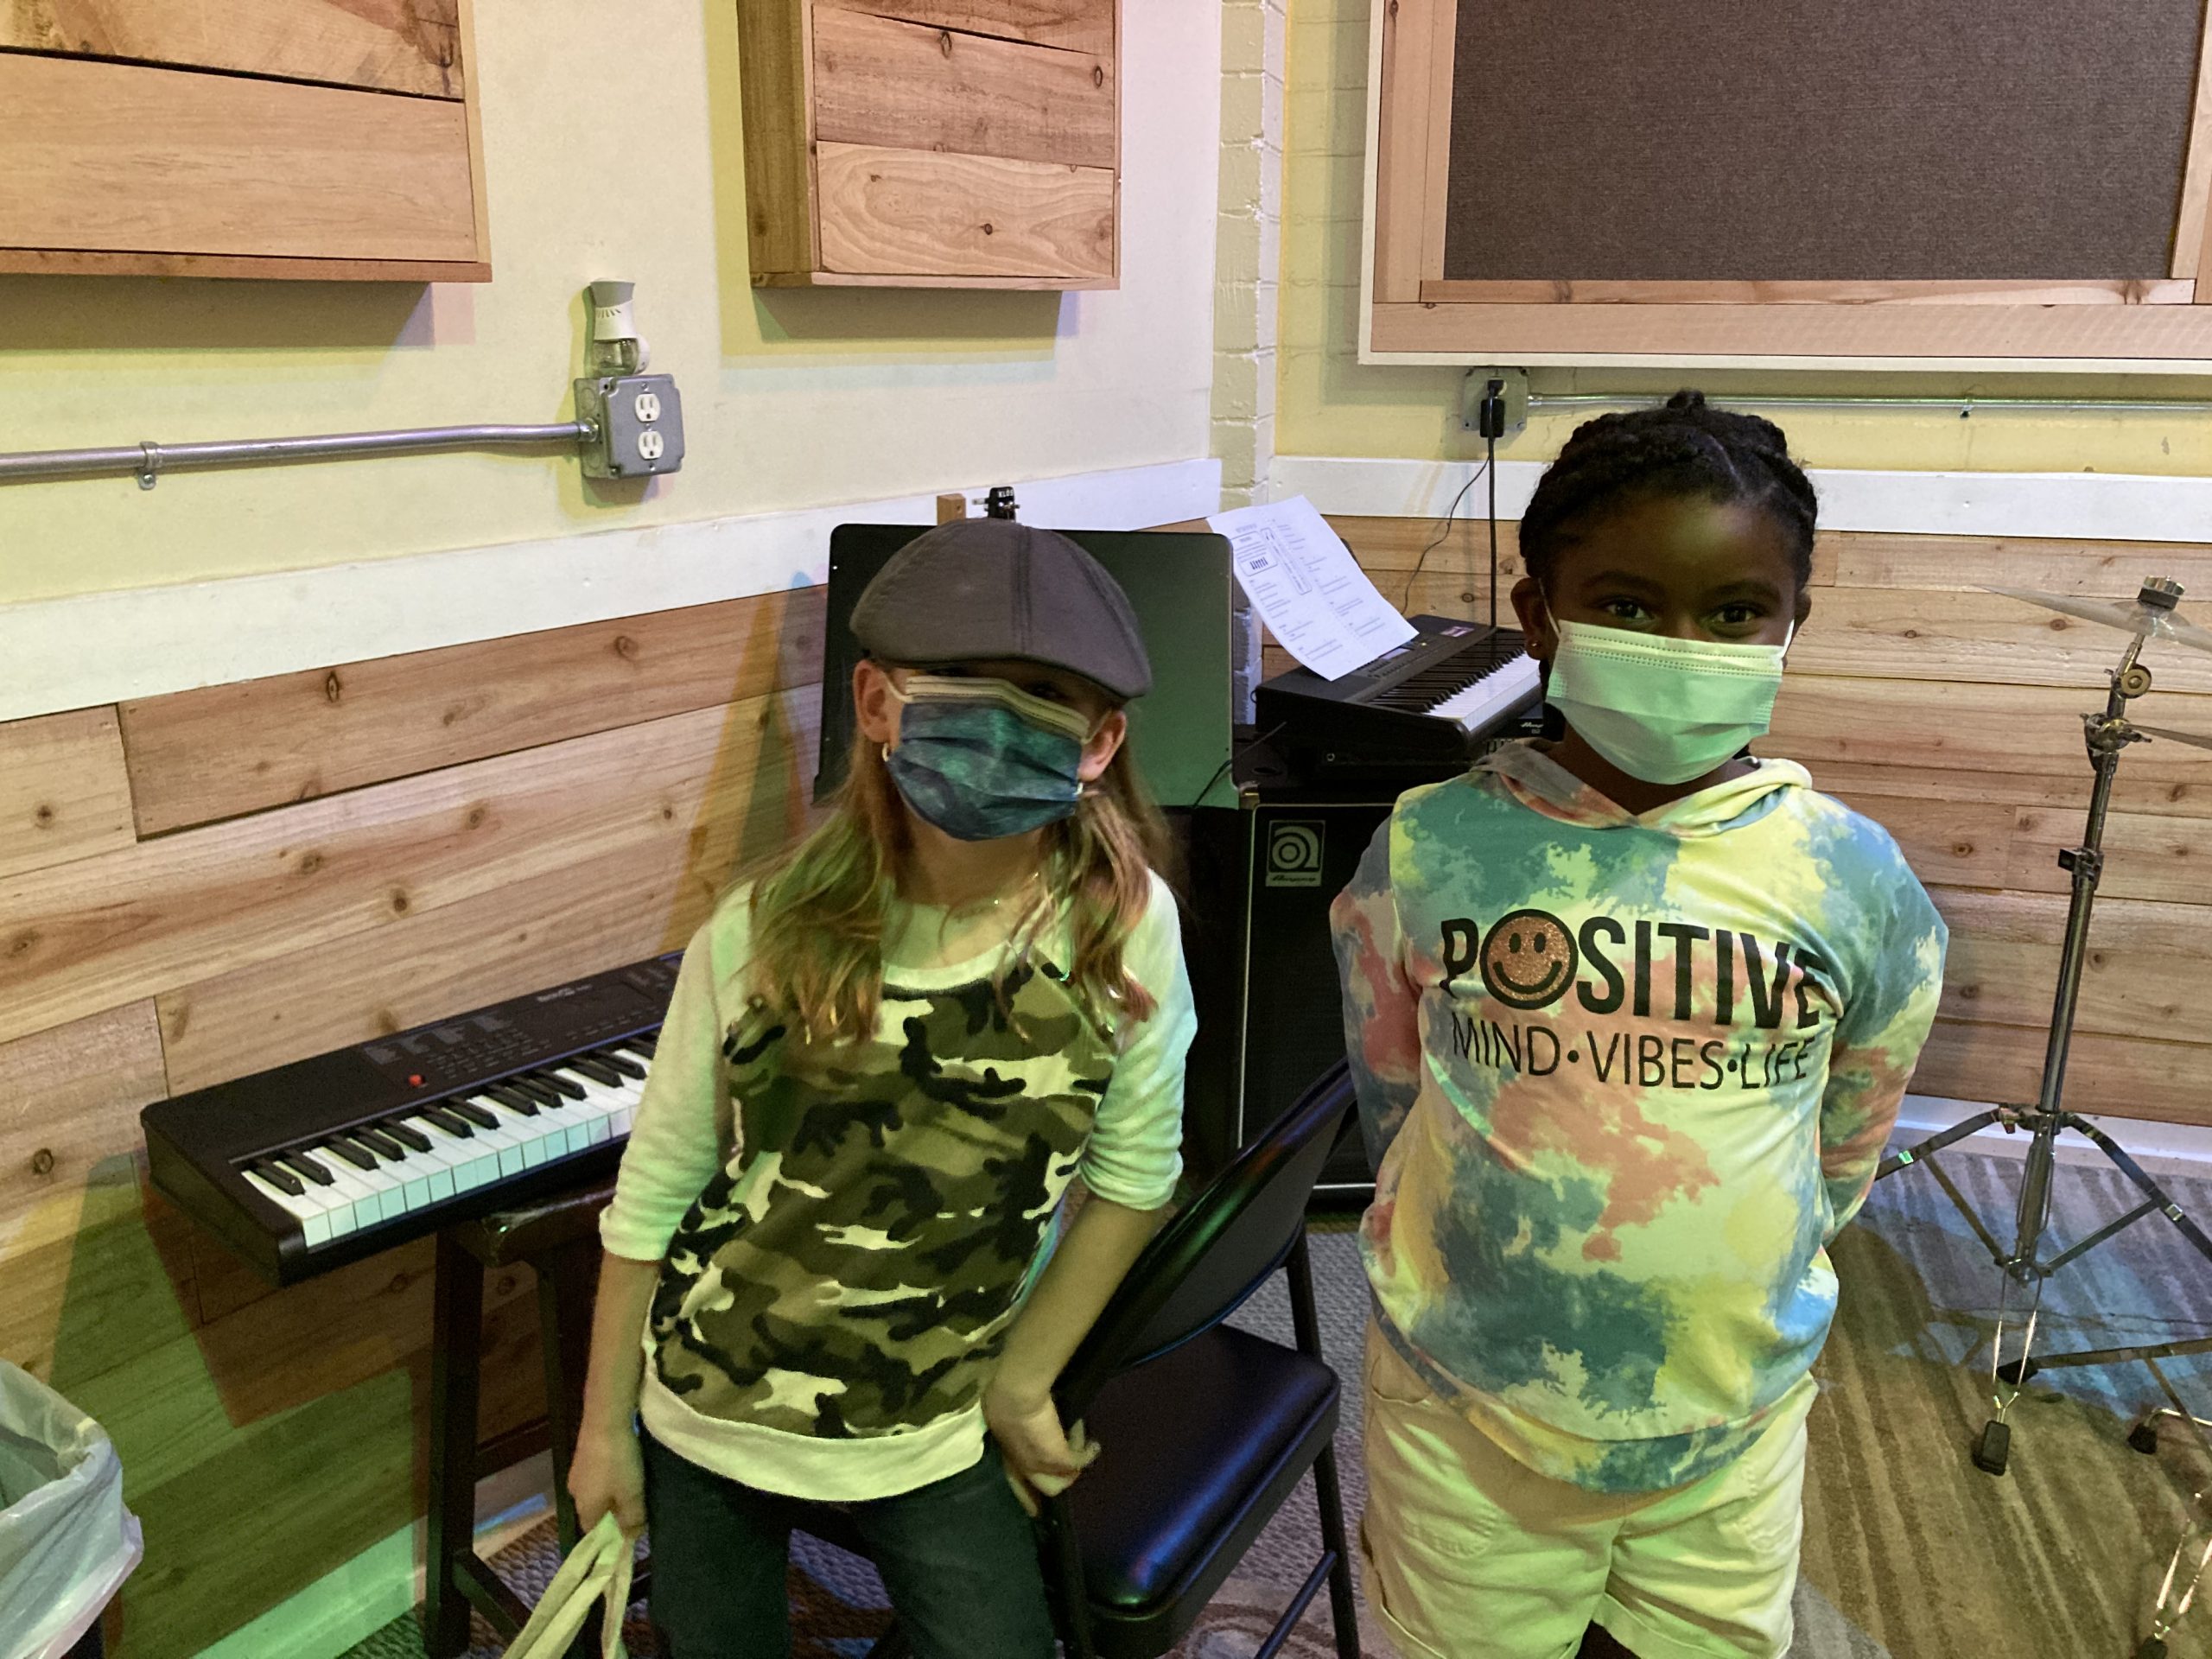 SUMMER MUSIC CAMPS IN LOS ANGELES